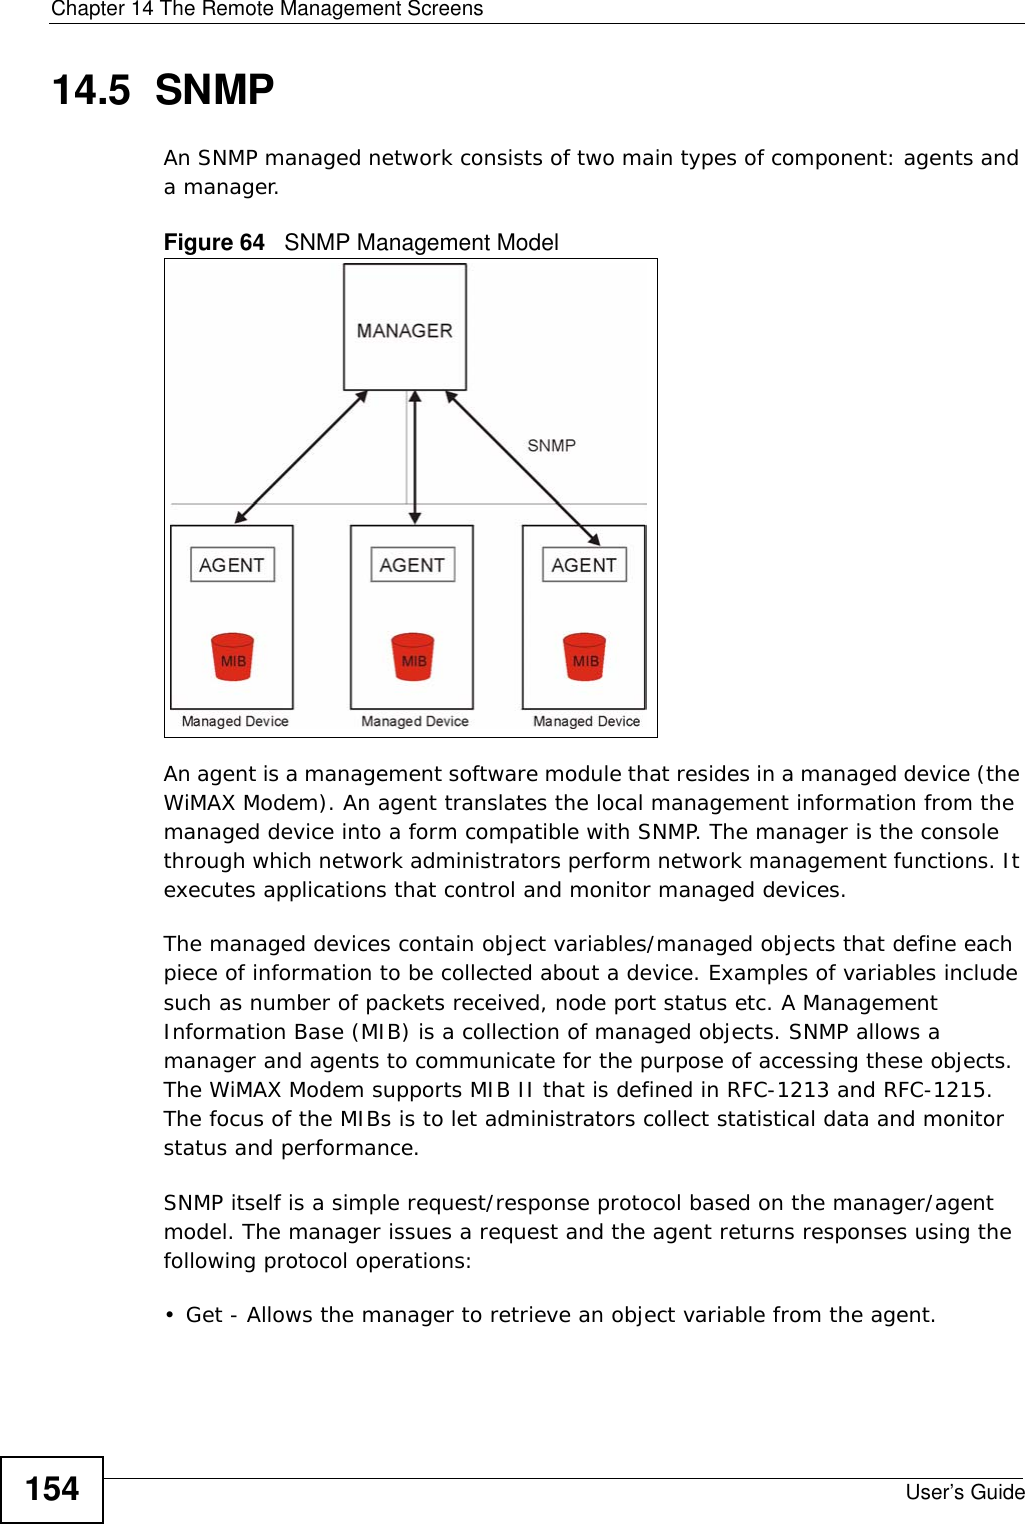 Chapter 14 The Remote Management ScreensUser’s Guide15414.5  SNMPAn SNMP managed network consists of two main types of component: agents and a manager.Figure 64   SNMP Management ModelAn agent is a management software module that resides in a managed device (the WiMAX Modem). An agent translates the local management information from the managed device into a form compatible with SNMP. The manager is the console through which network administrators perform network management functions. It executes applications that control and monitor managed devices. The managed devices contain object variables/managed objects that define each piece of information to be collected about a device. Examples of variables include such as number of packets received, node port status etc. A Management Information Base (MIB) is a collection of managed objects. SNMP allows a manager and agents to communicate for the purpose of accessing these objects. The WiMAX Modem supports MIB II that is defined in RFC-1213 and RFC-1215. The focus of the MIBs is to let administrators collect statistical data and monitor status and performance.SNMP itself is a simple request/response protocol based on the manager/agent model. The manager issues a request and the agent returns responses using the following protocol operations: • Get - Allows the manager to retrieve an object variable from the agent. 